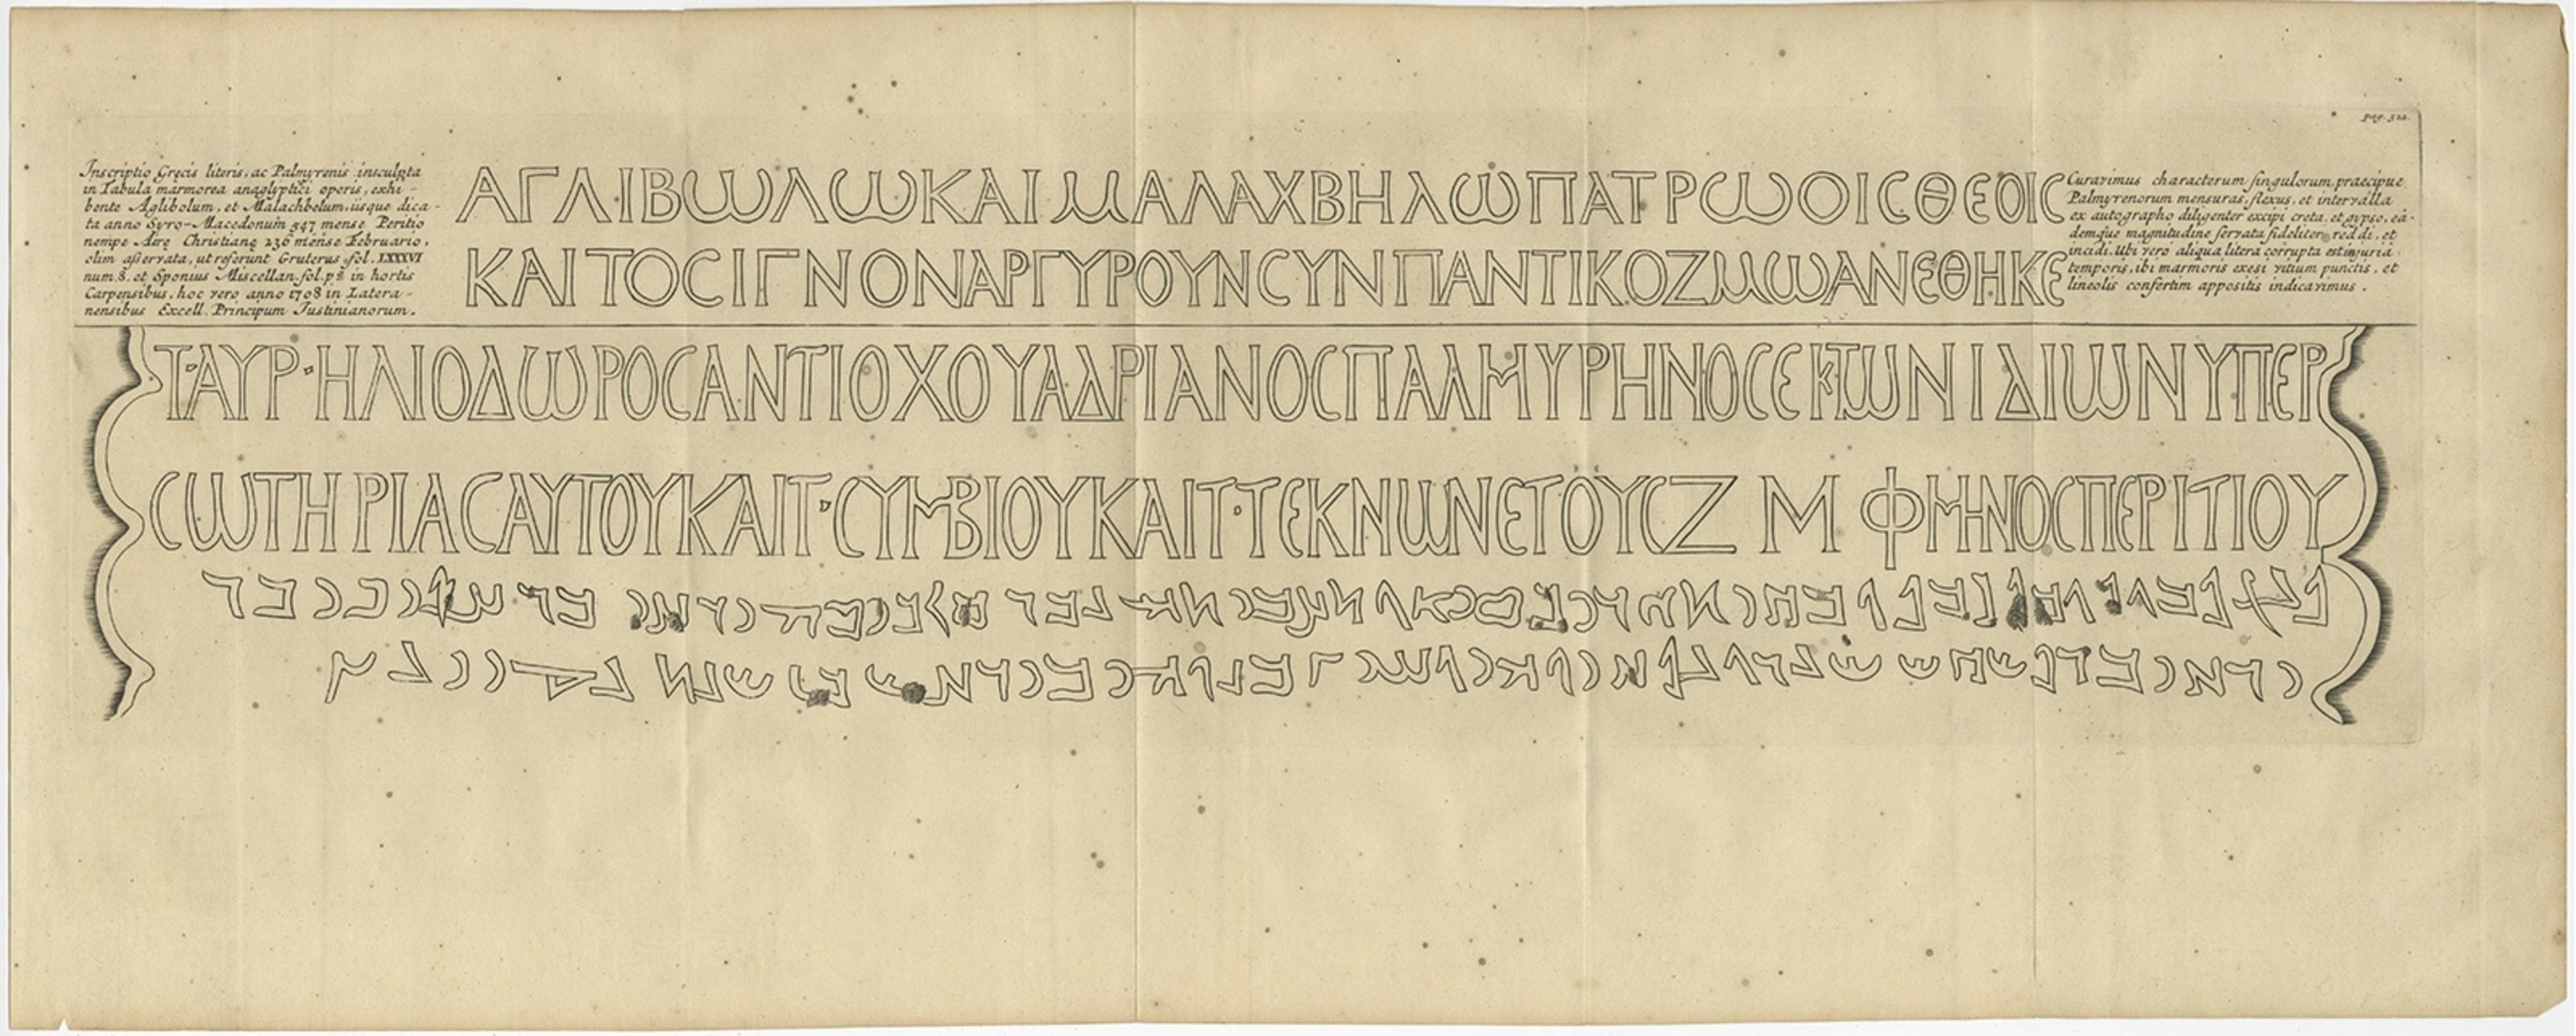 Untitled print of a Greek inscription. Source unknown, to be determined.